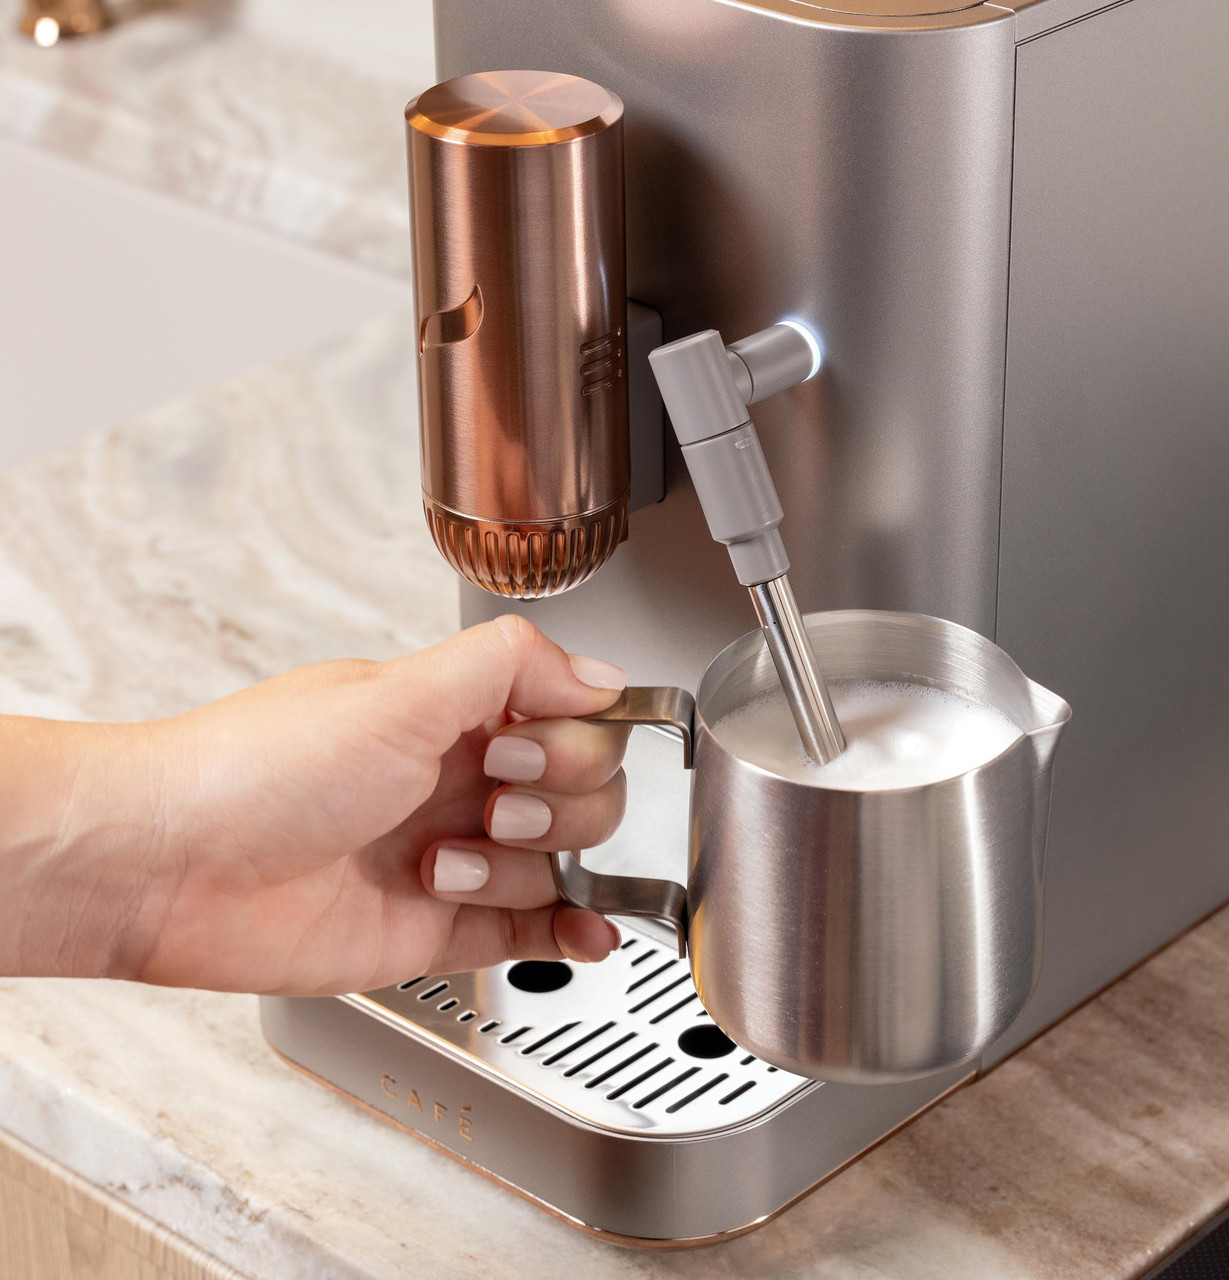 Kaffe Electric Coffee Grinder Easy On/Off Button Copper